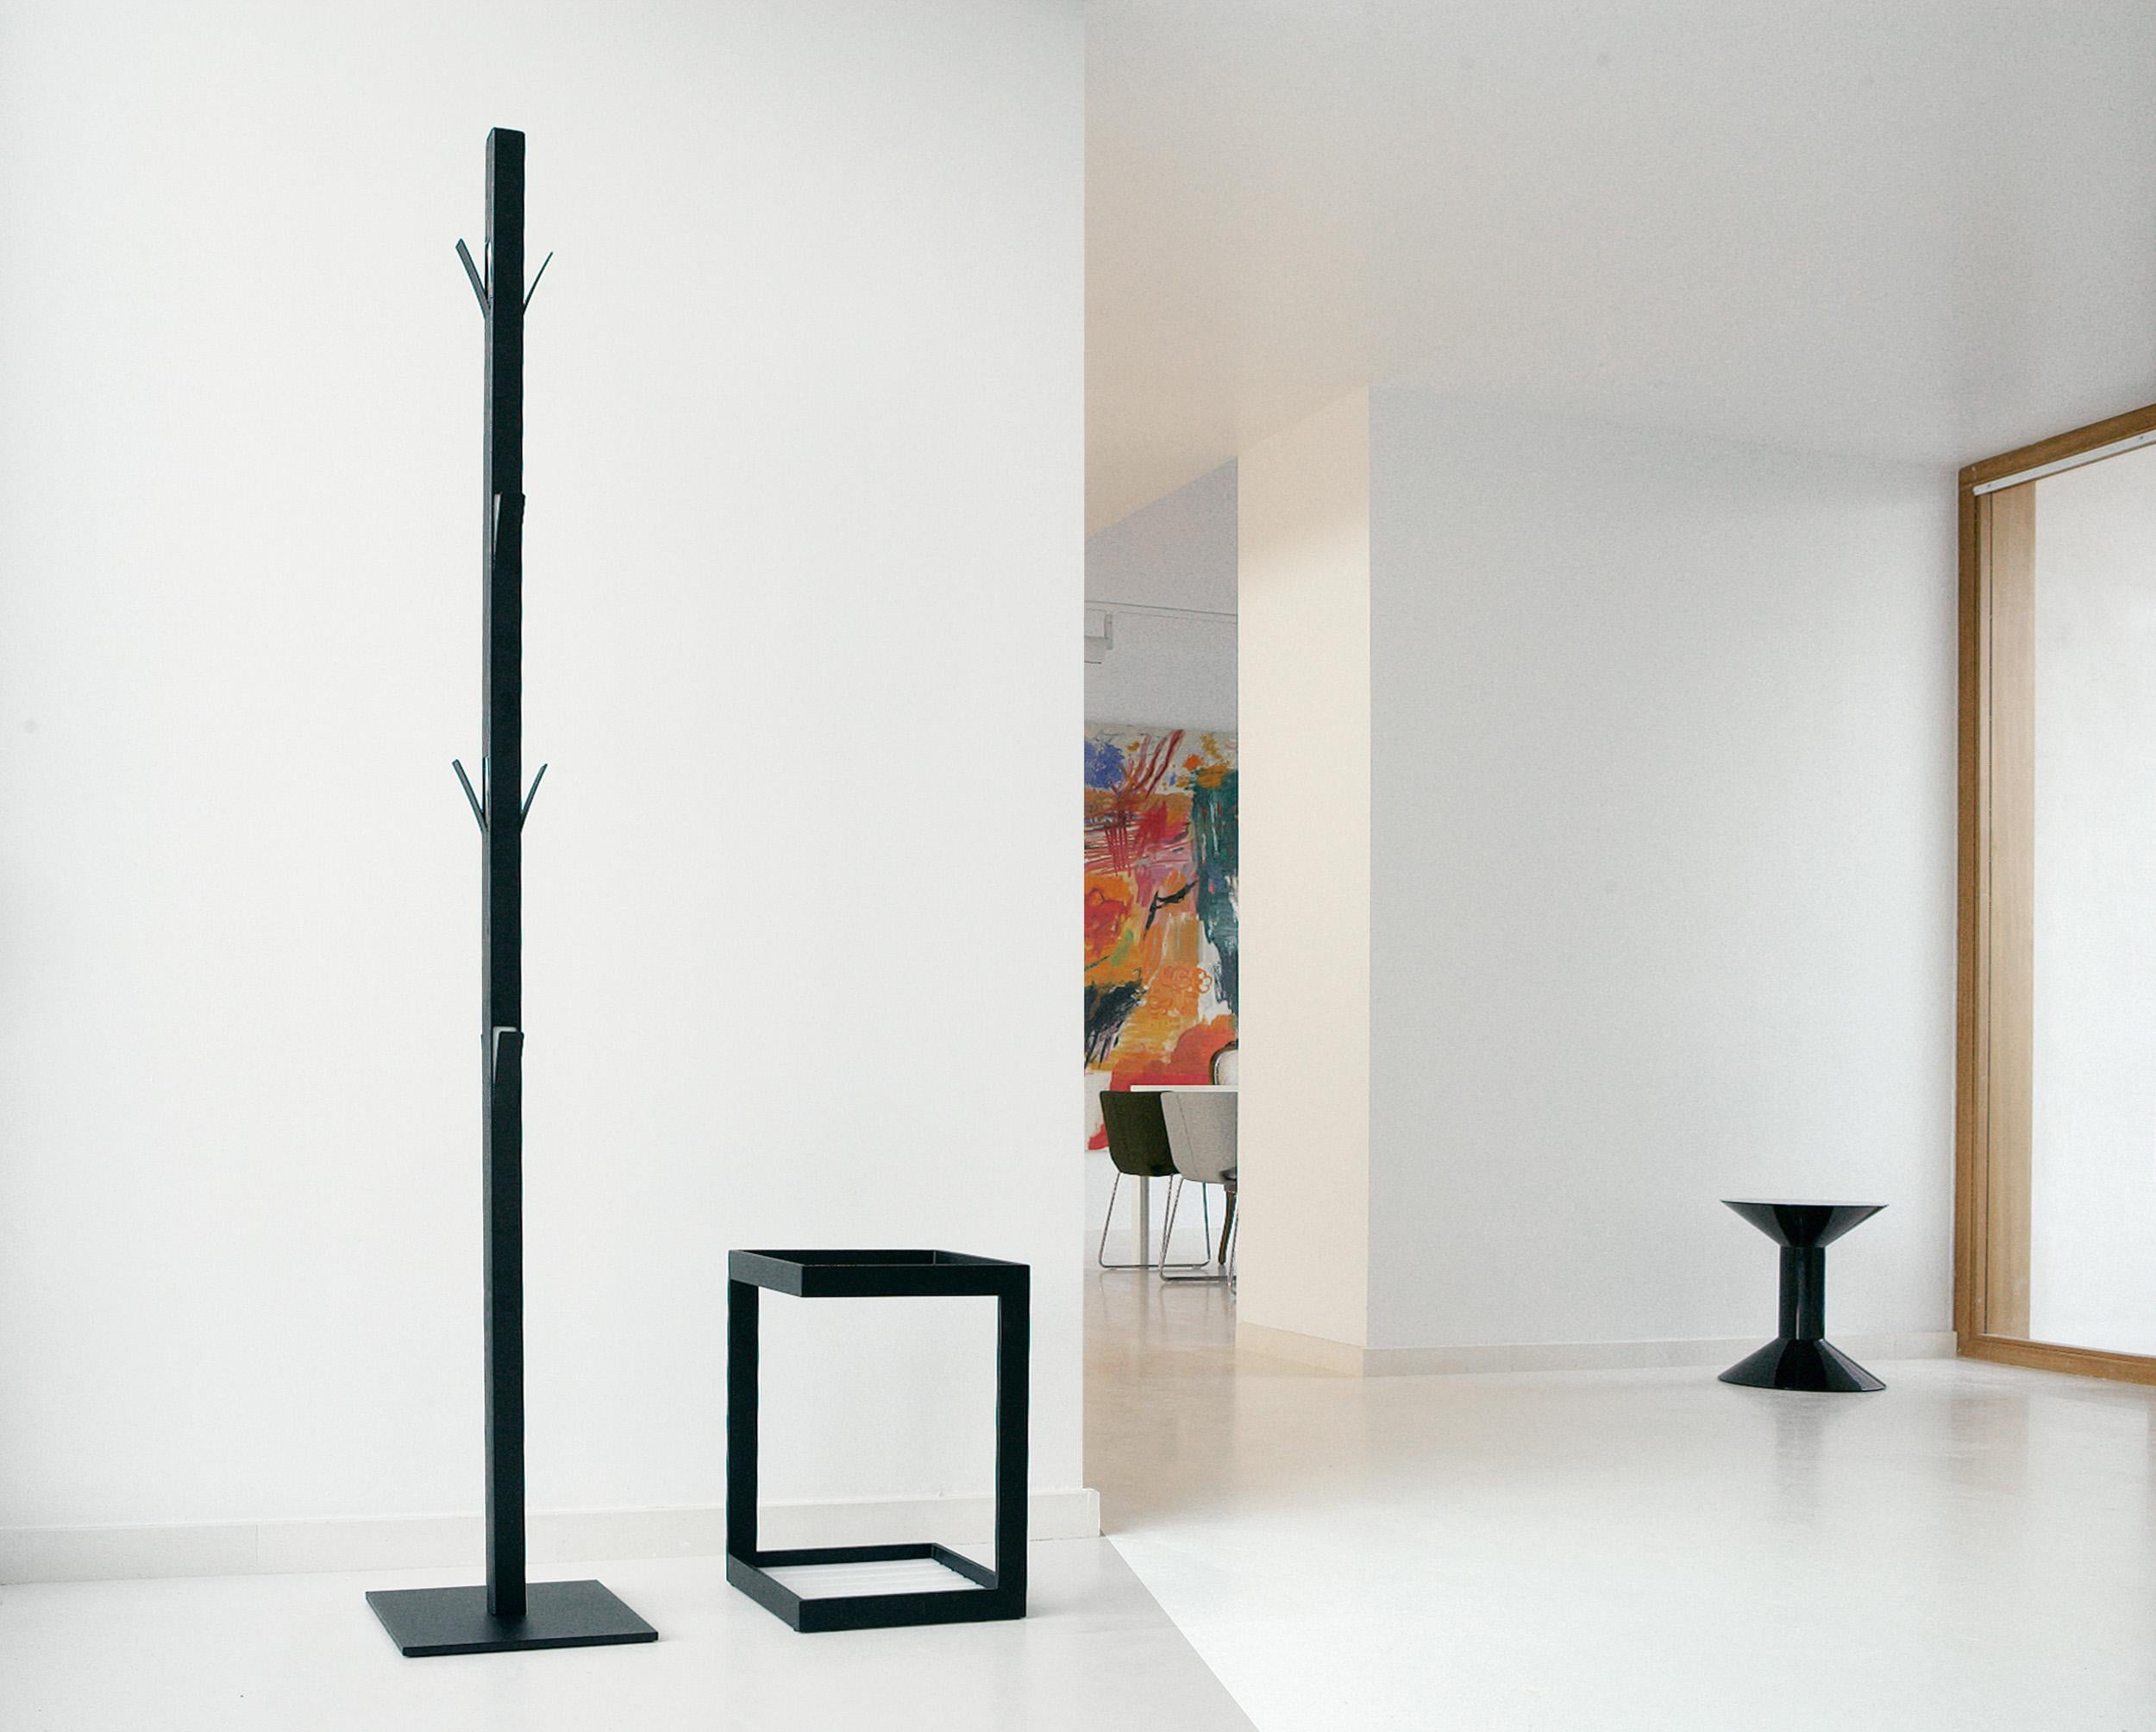 Viccarbe collection of coat racks and umbrella stands for domestic and contract use.

Inspired by Donald Judd’s Minimalist sculptures, the ‘windows’ of the rack are laser cut and carefully designed for the proper care of clothes.

Calibrated